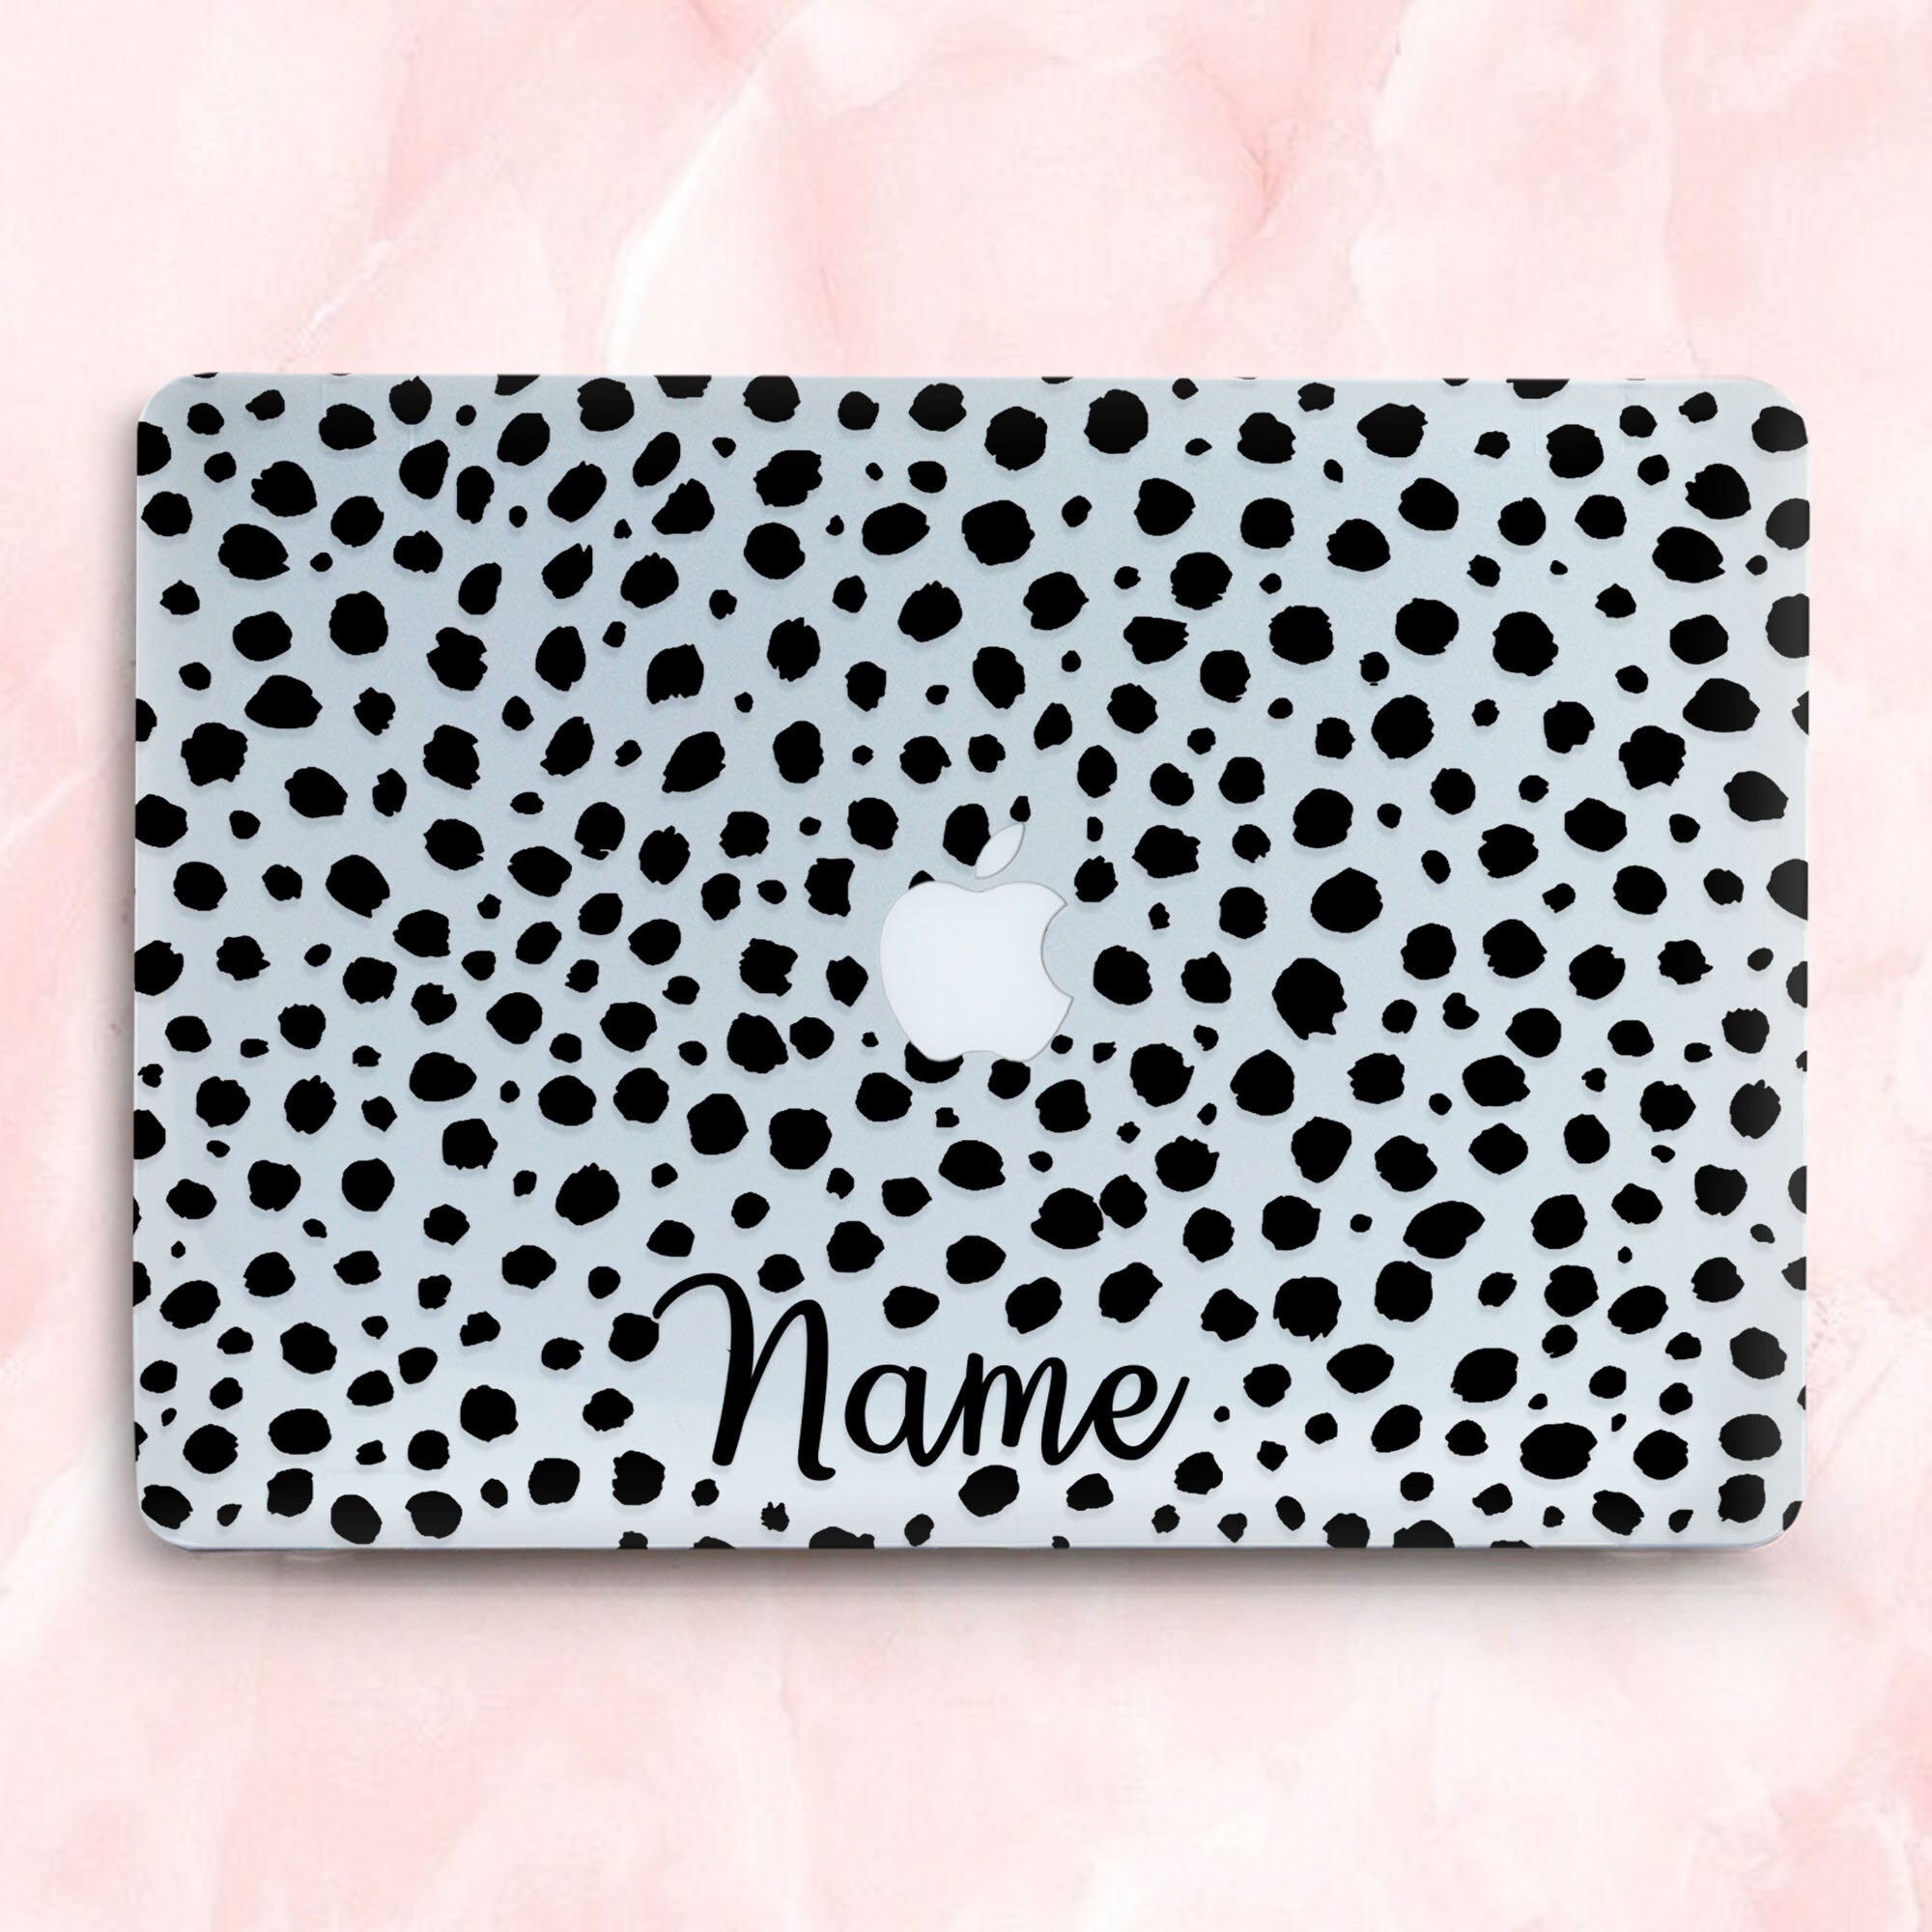 Dream Polka Dot New Pro Mac Hard Protective Case Personalized Name For Macbook Air 1113 Pro131516 2008-2020